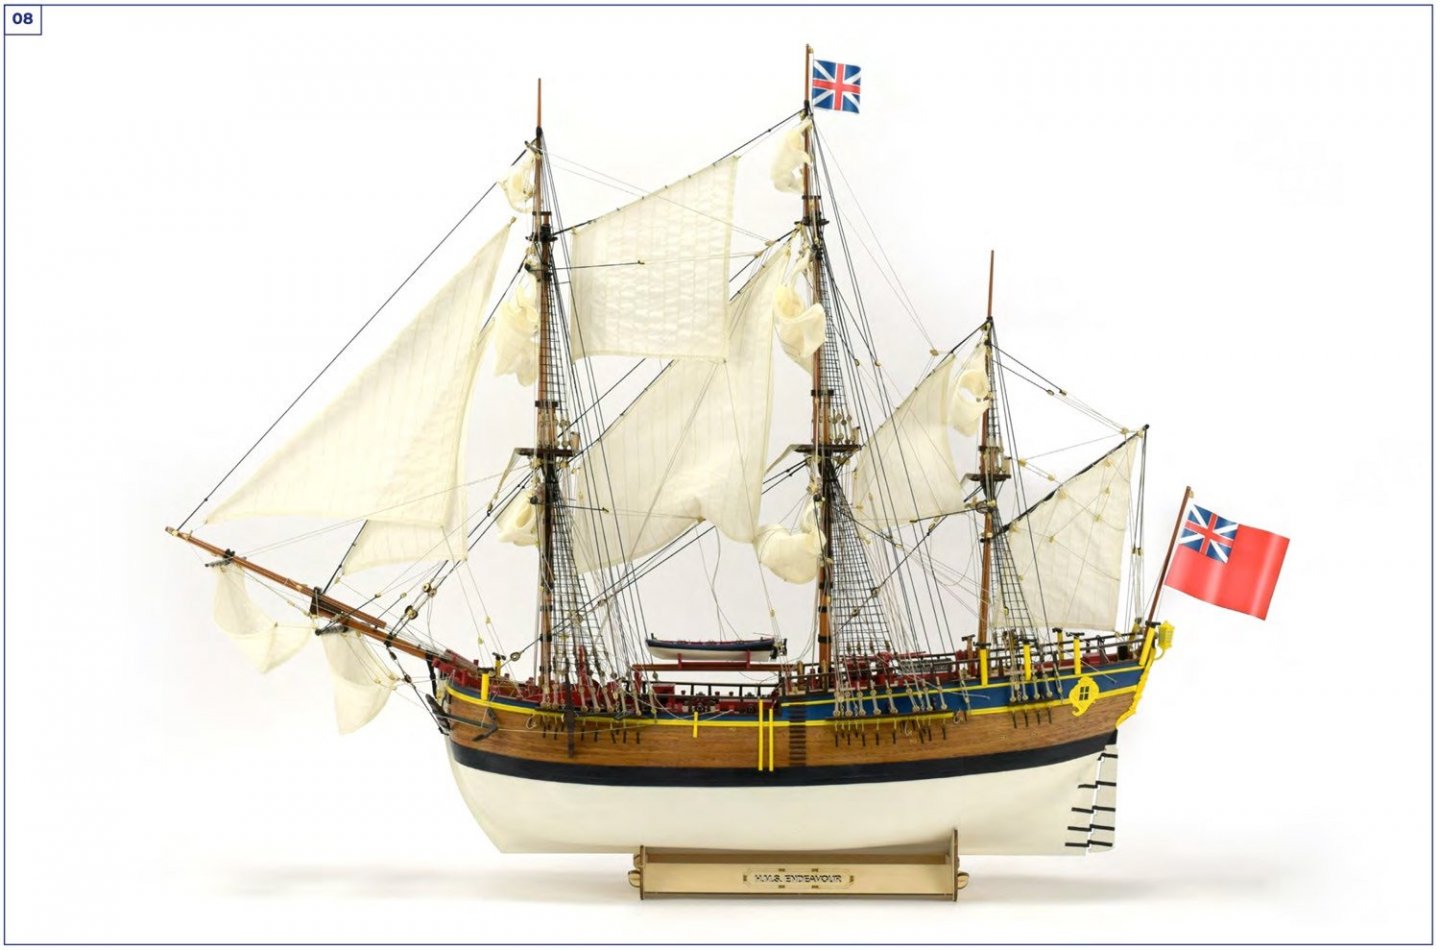 Wooden ship model of HMS Endeavour by Artesania Latina 22520